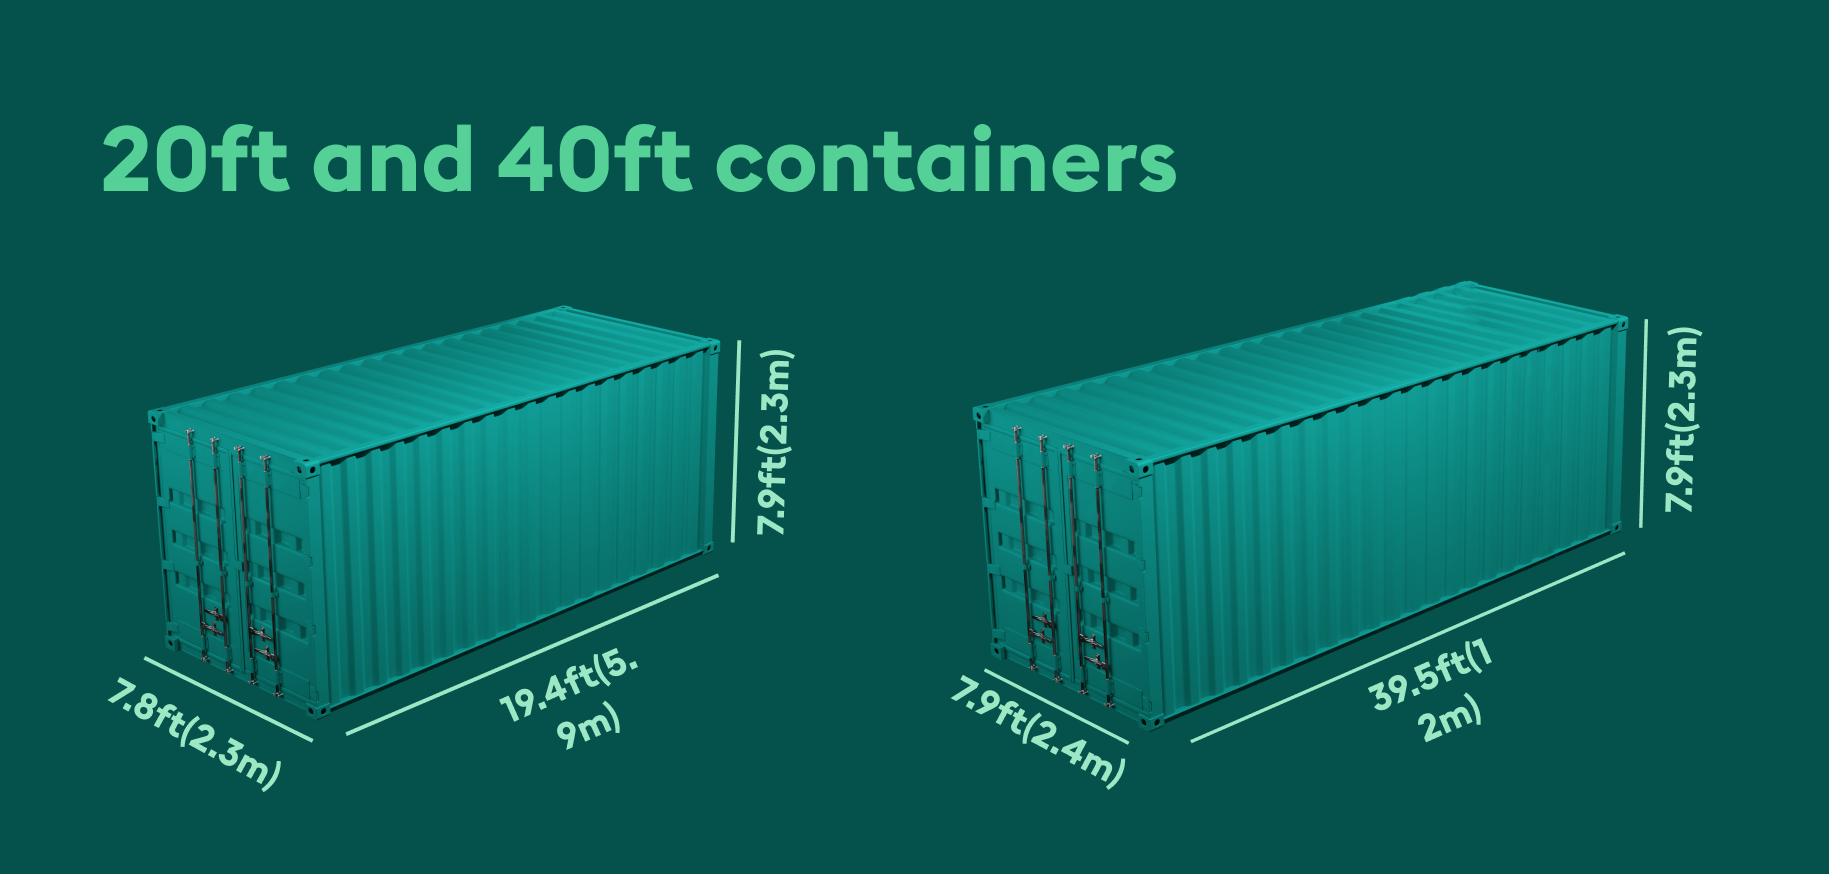 20ft and 40ft containers with dimensions